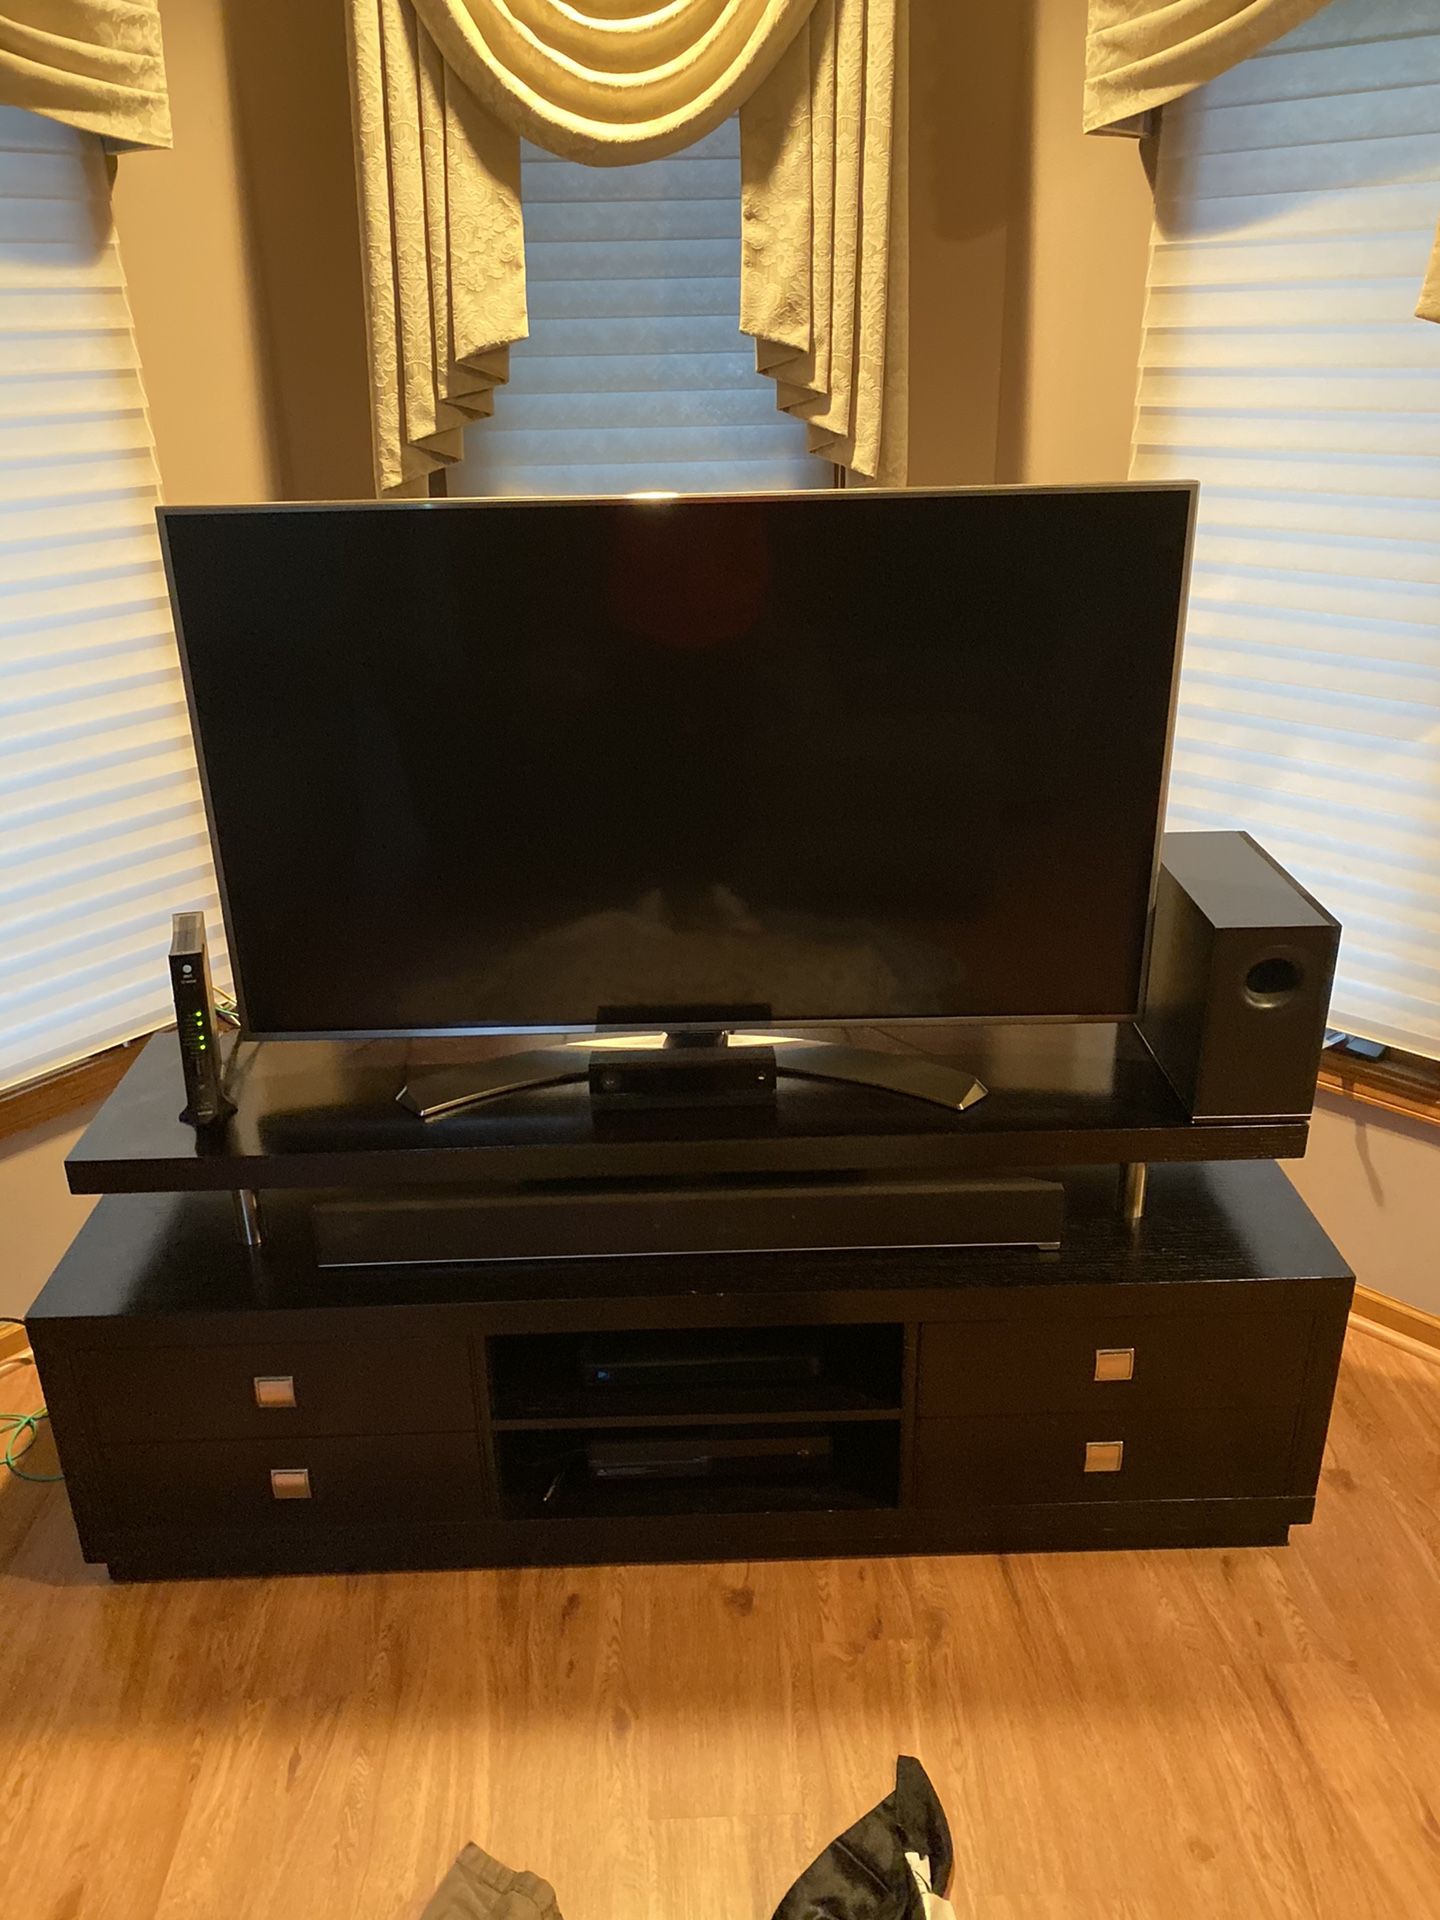 Entertainment center with towers